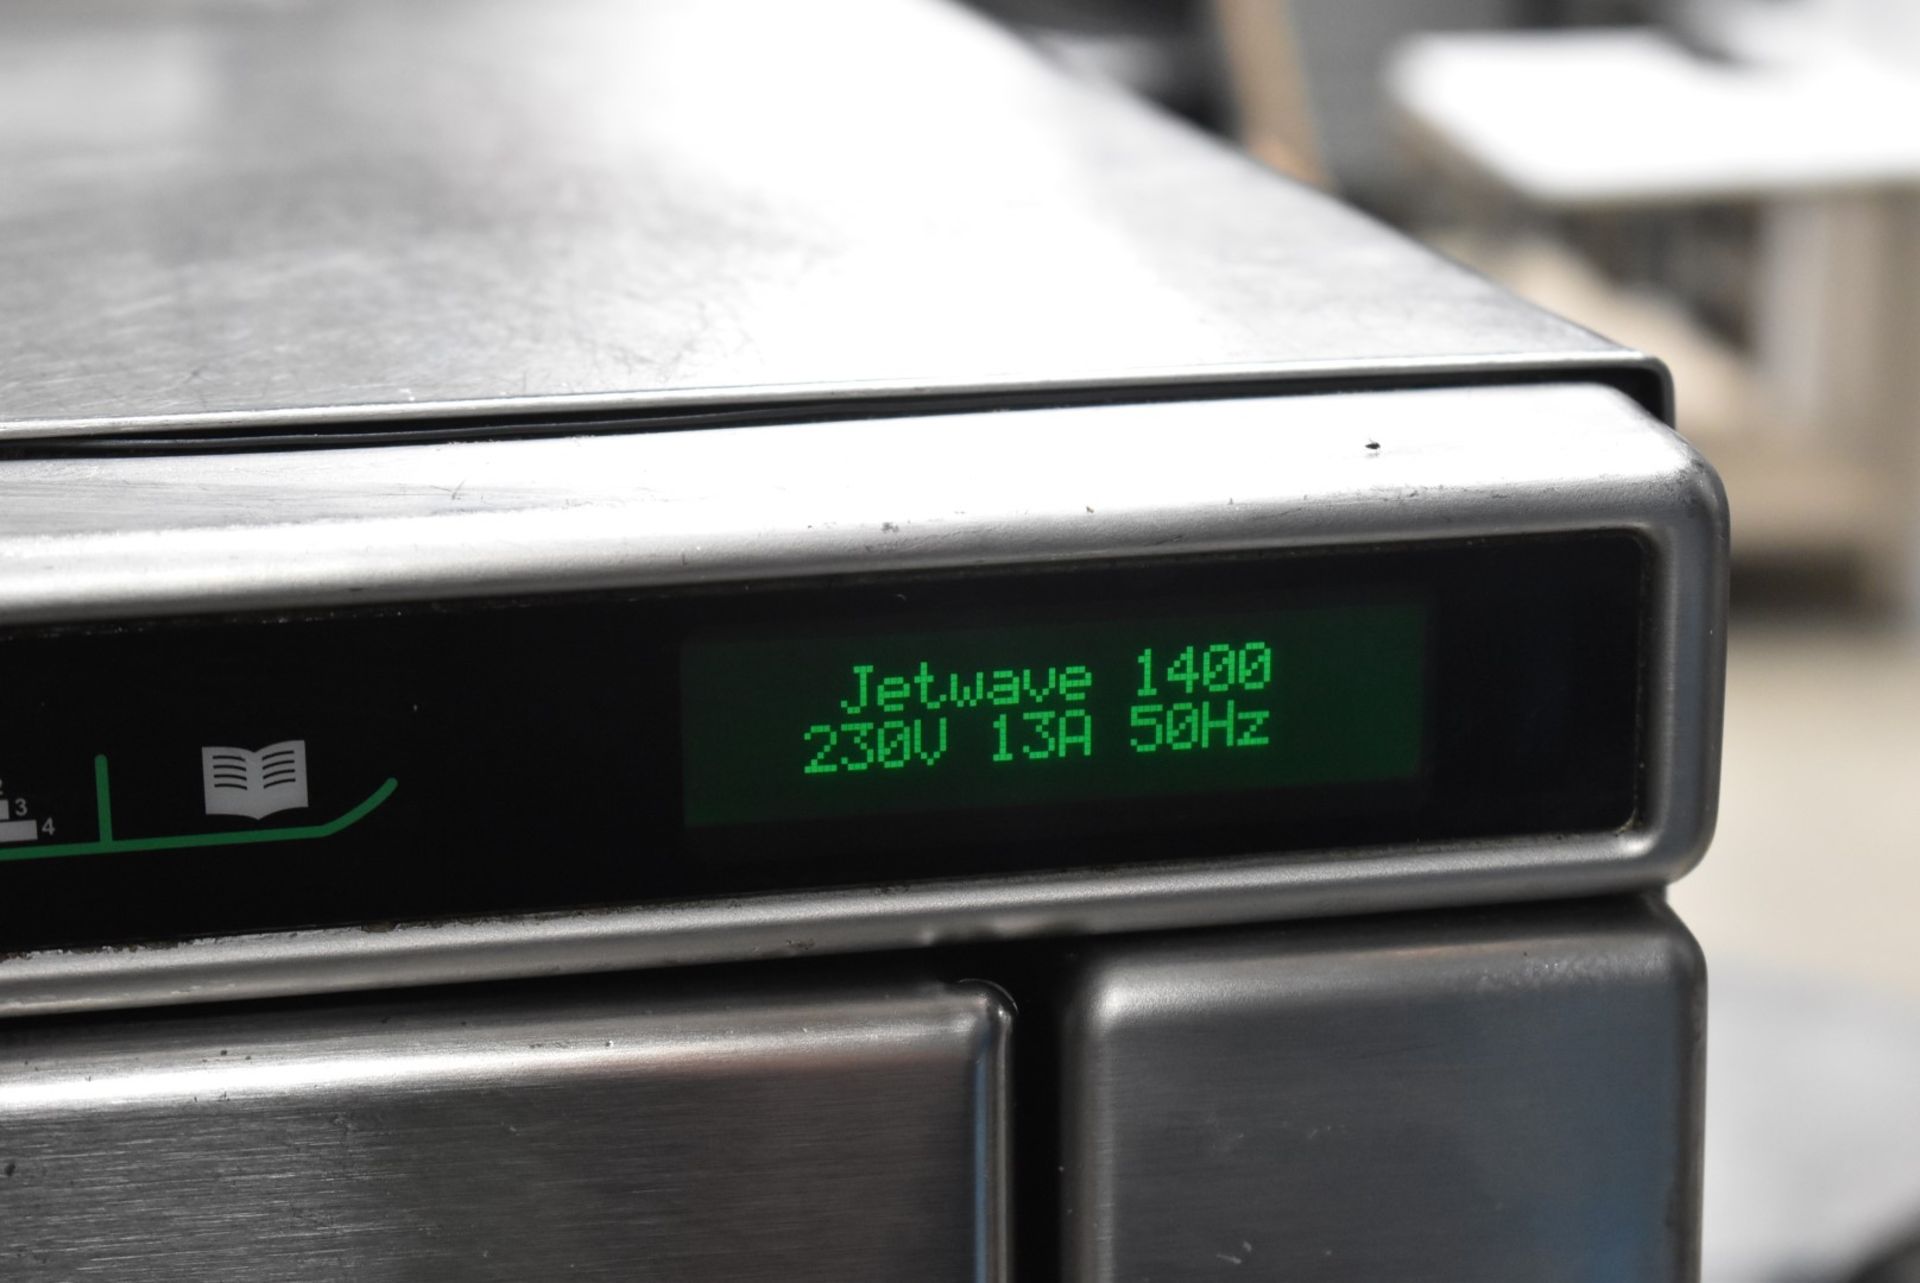 1 x Menumaster Jetwave JET514U High Speed Combination Microwave Oven - RRP £2,400 - Manufacture - Image 3 of 11